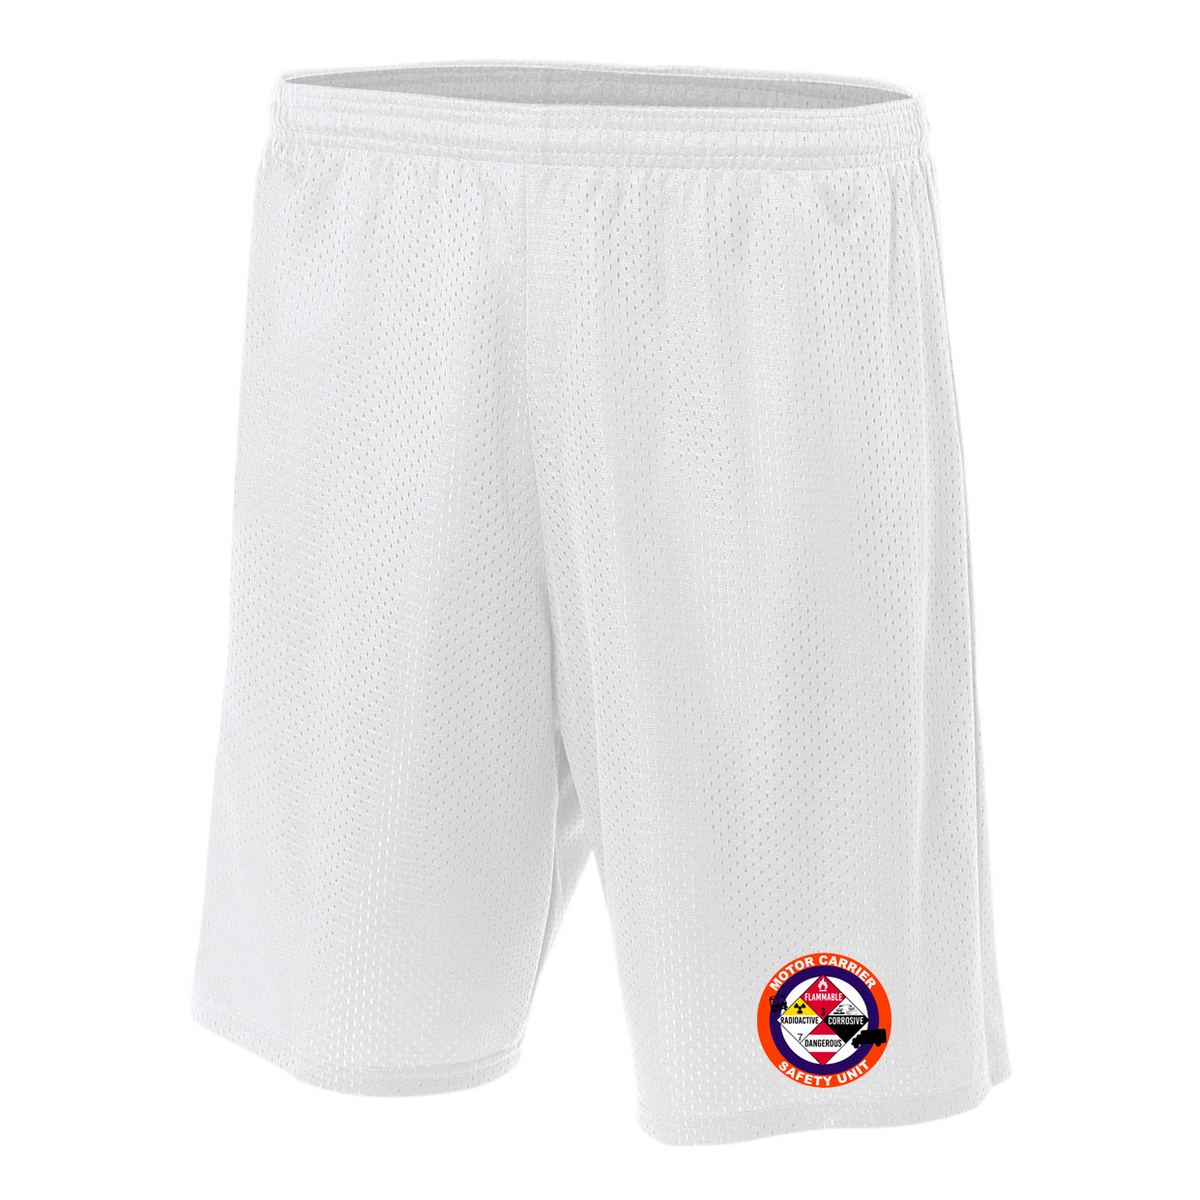 NCPD Motor Carrier Unit 7" Lined Tricot Mesh Shorts